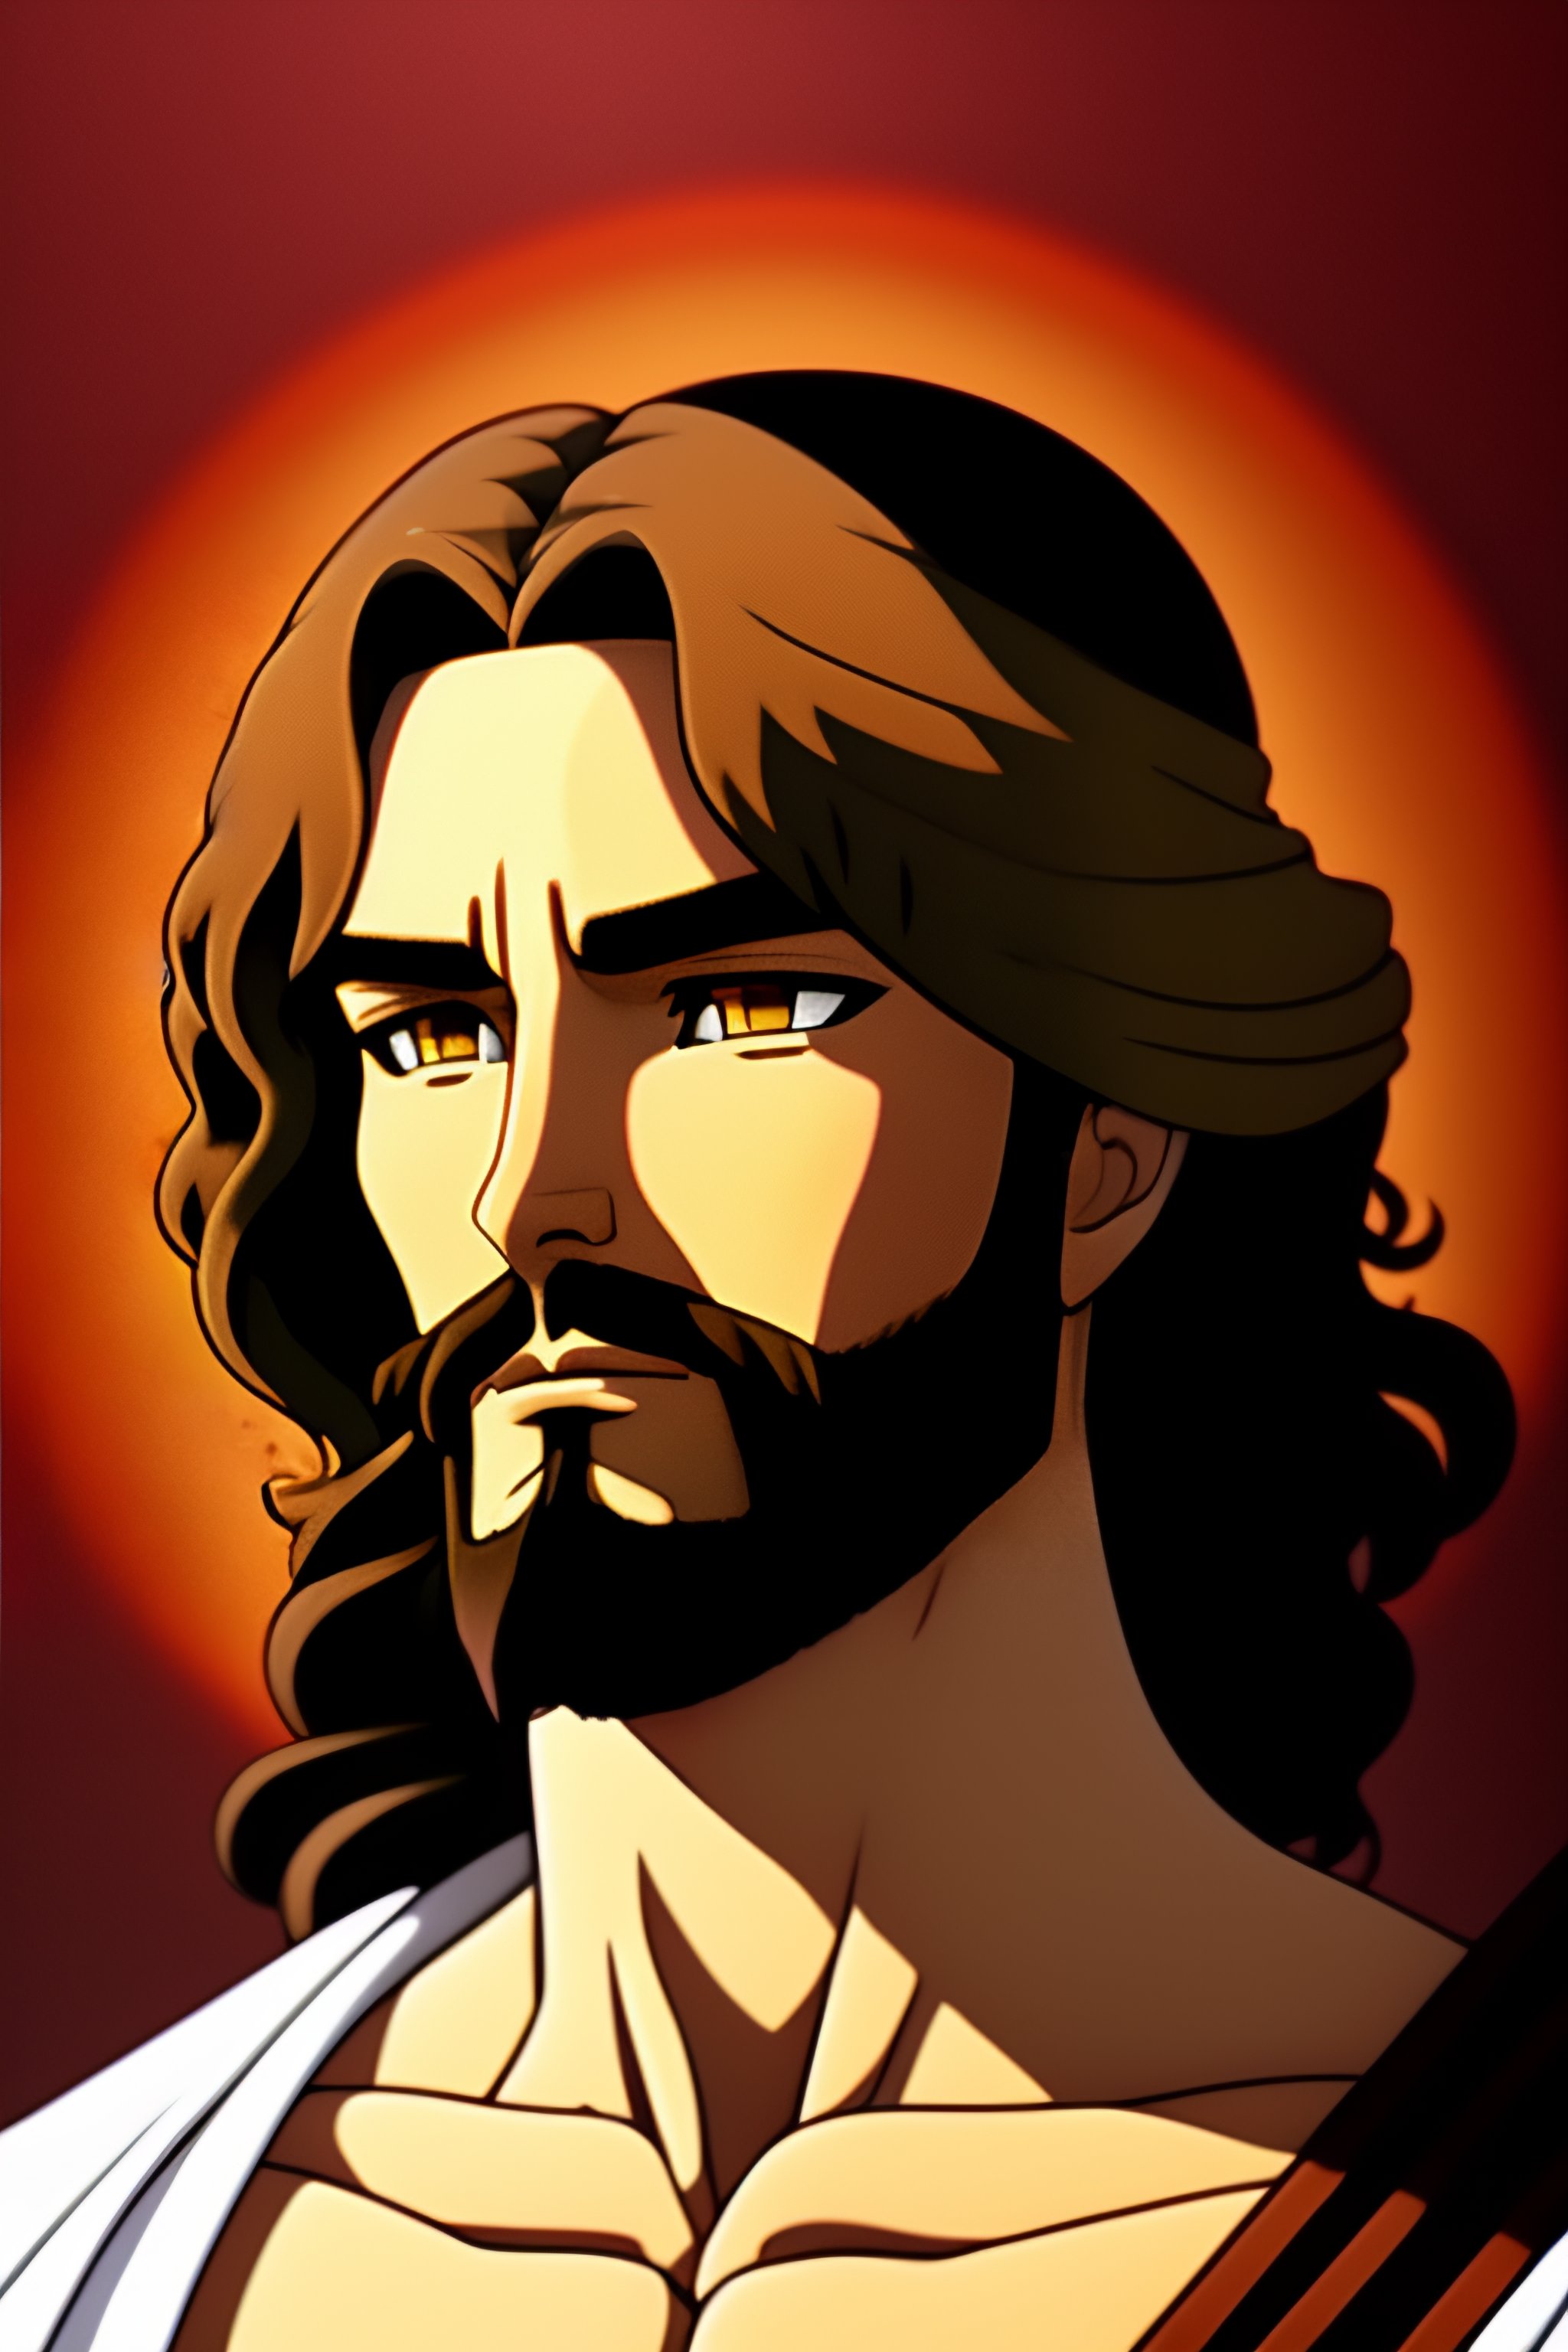 Lexica - Jesus in anime style